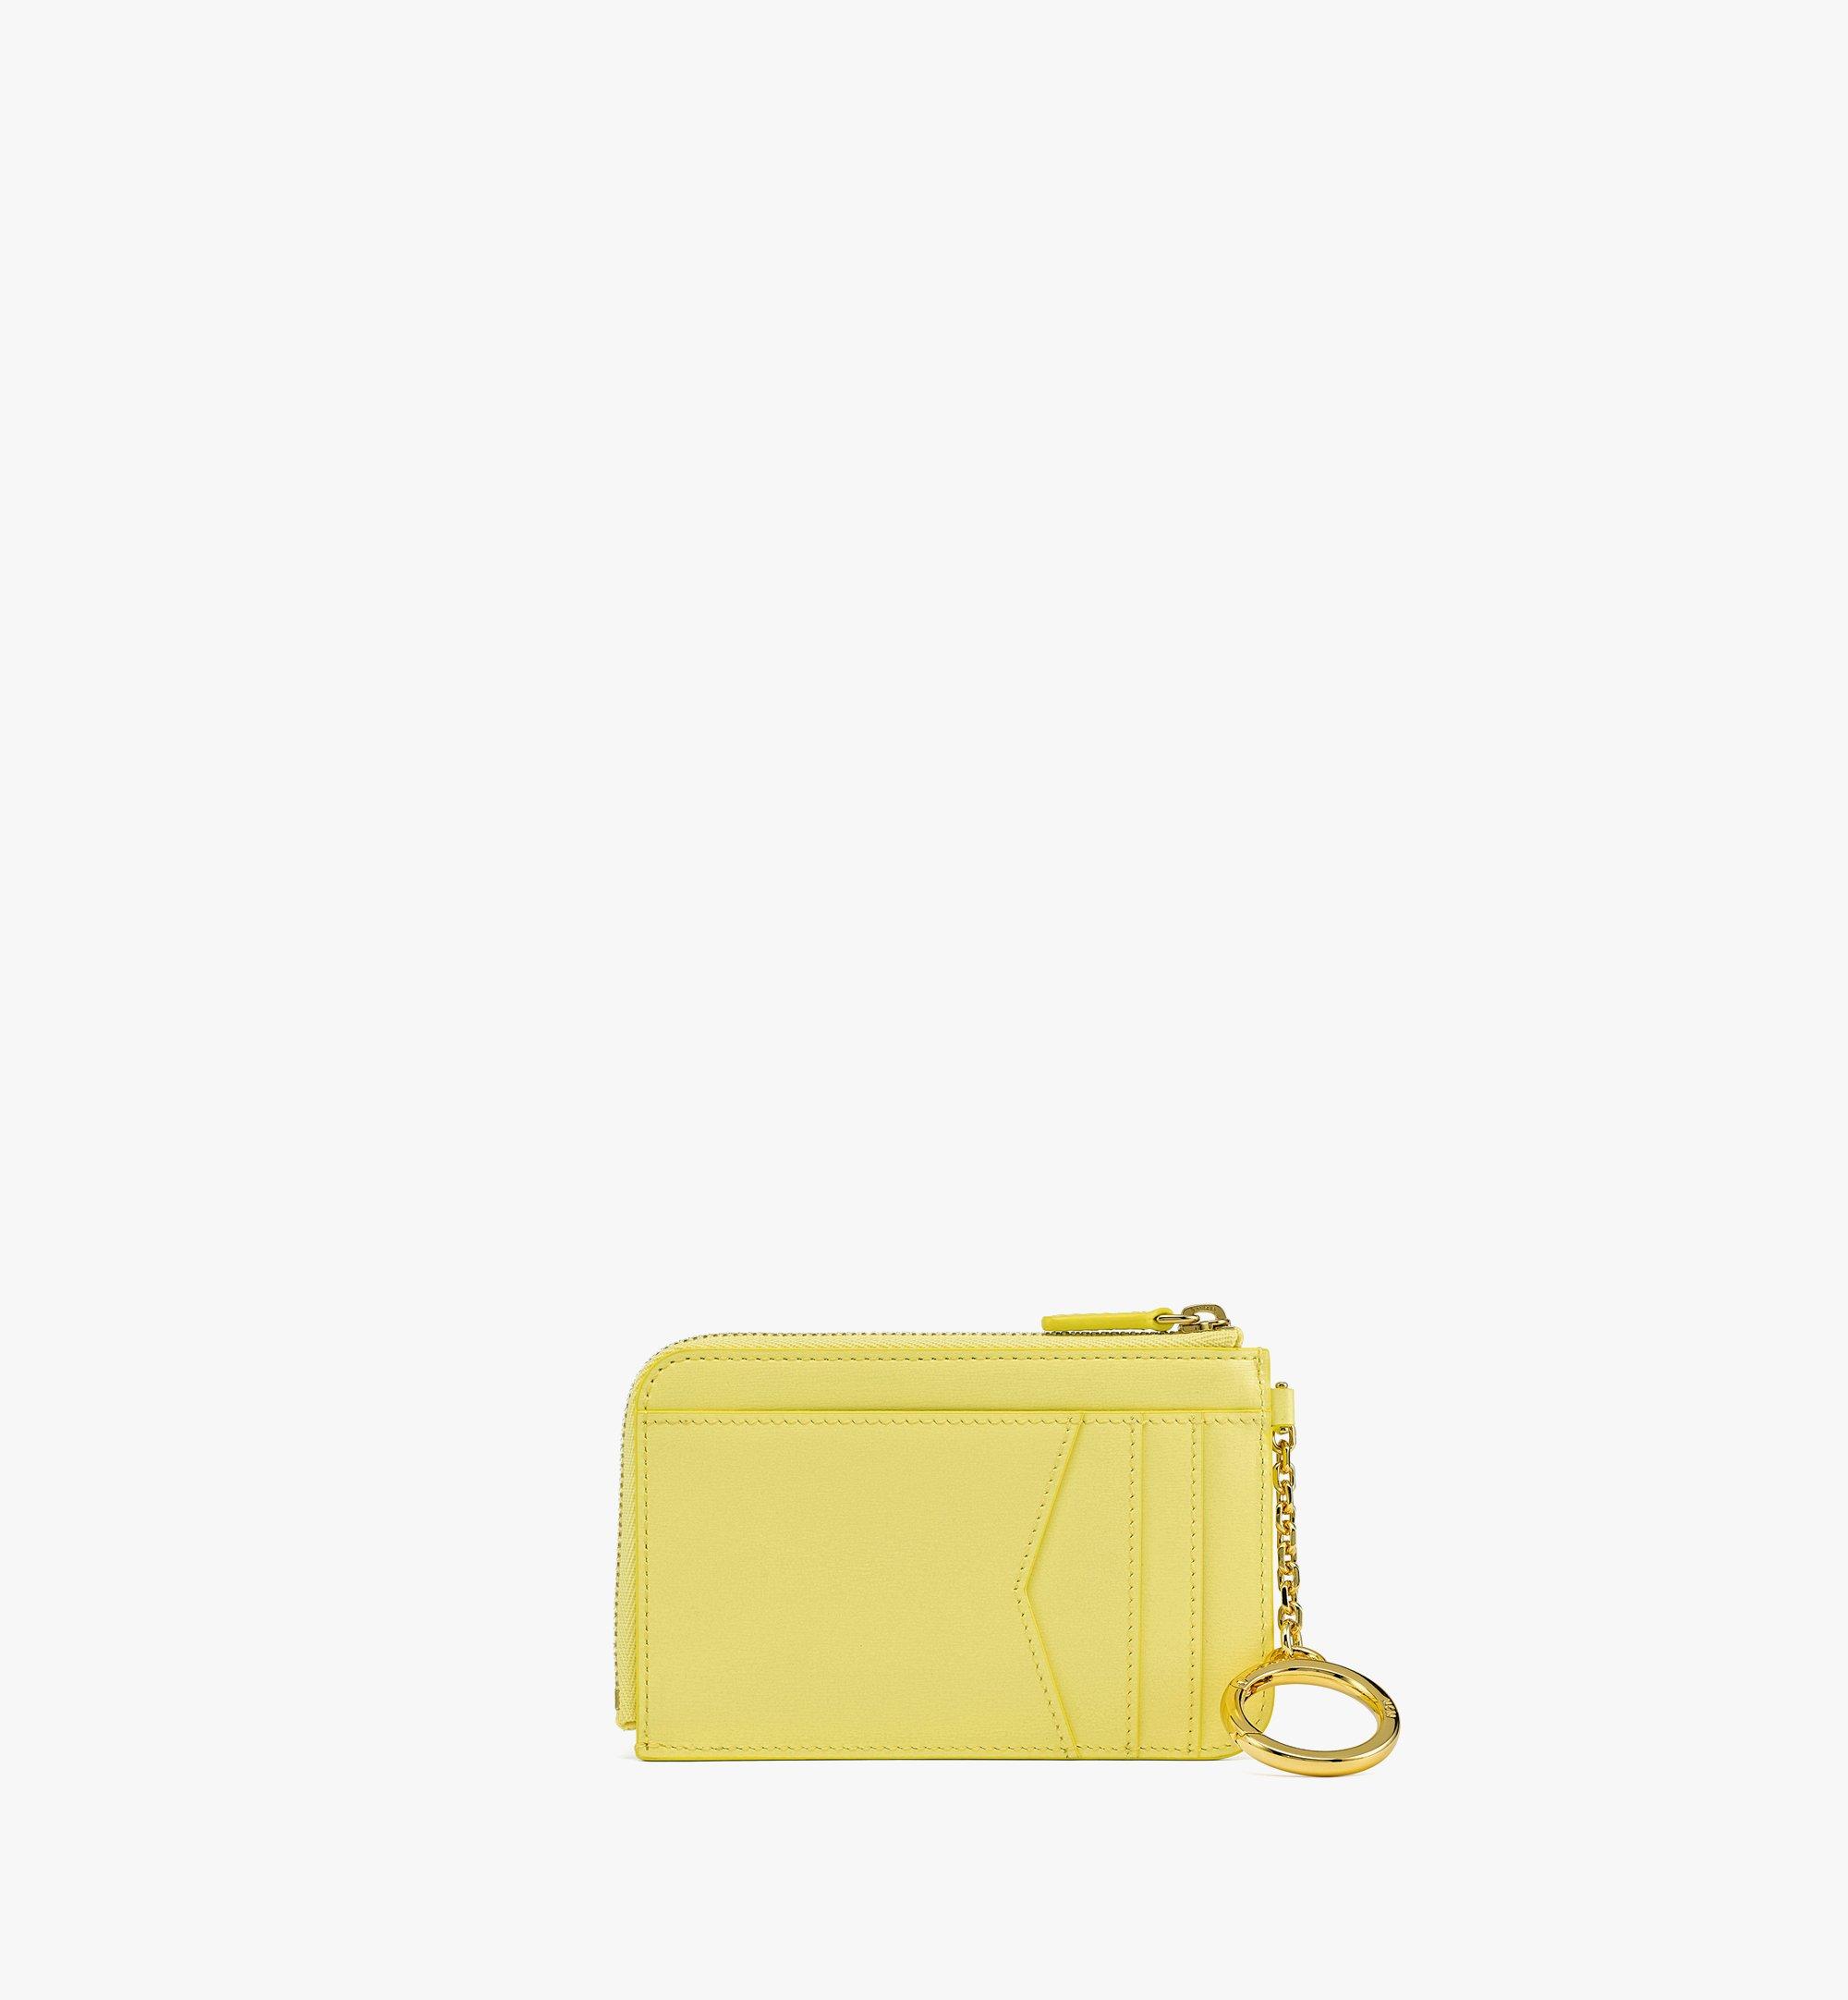 MCM Patricia Zip Card Case in Spanish Leather Yellow MYACSPA01Y4001 Alternate View 2